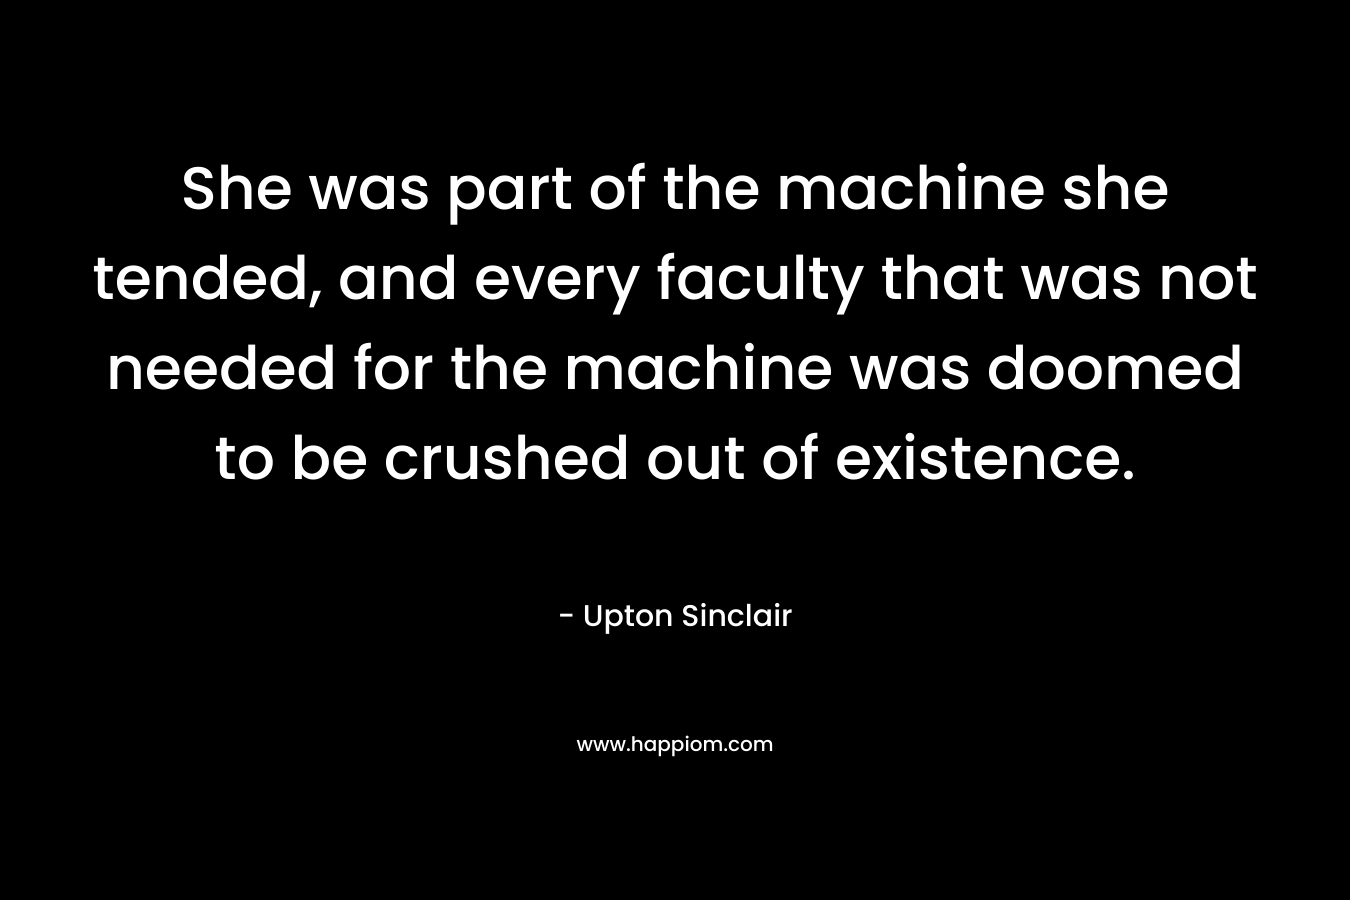 She was part of the machine she tended, and every faculty that was not needed for the machine was doomed to be crushed out of existence. – Upton Sinclair